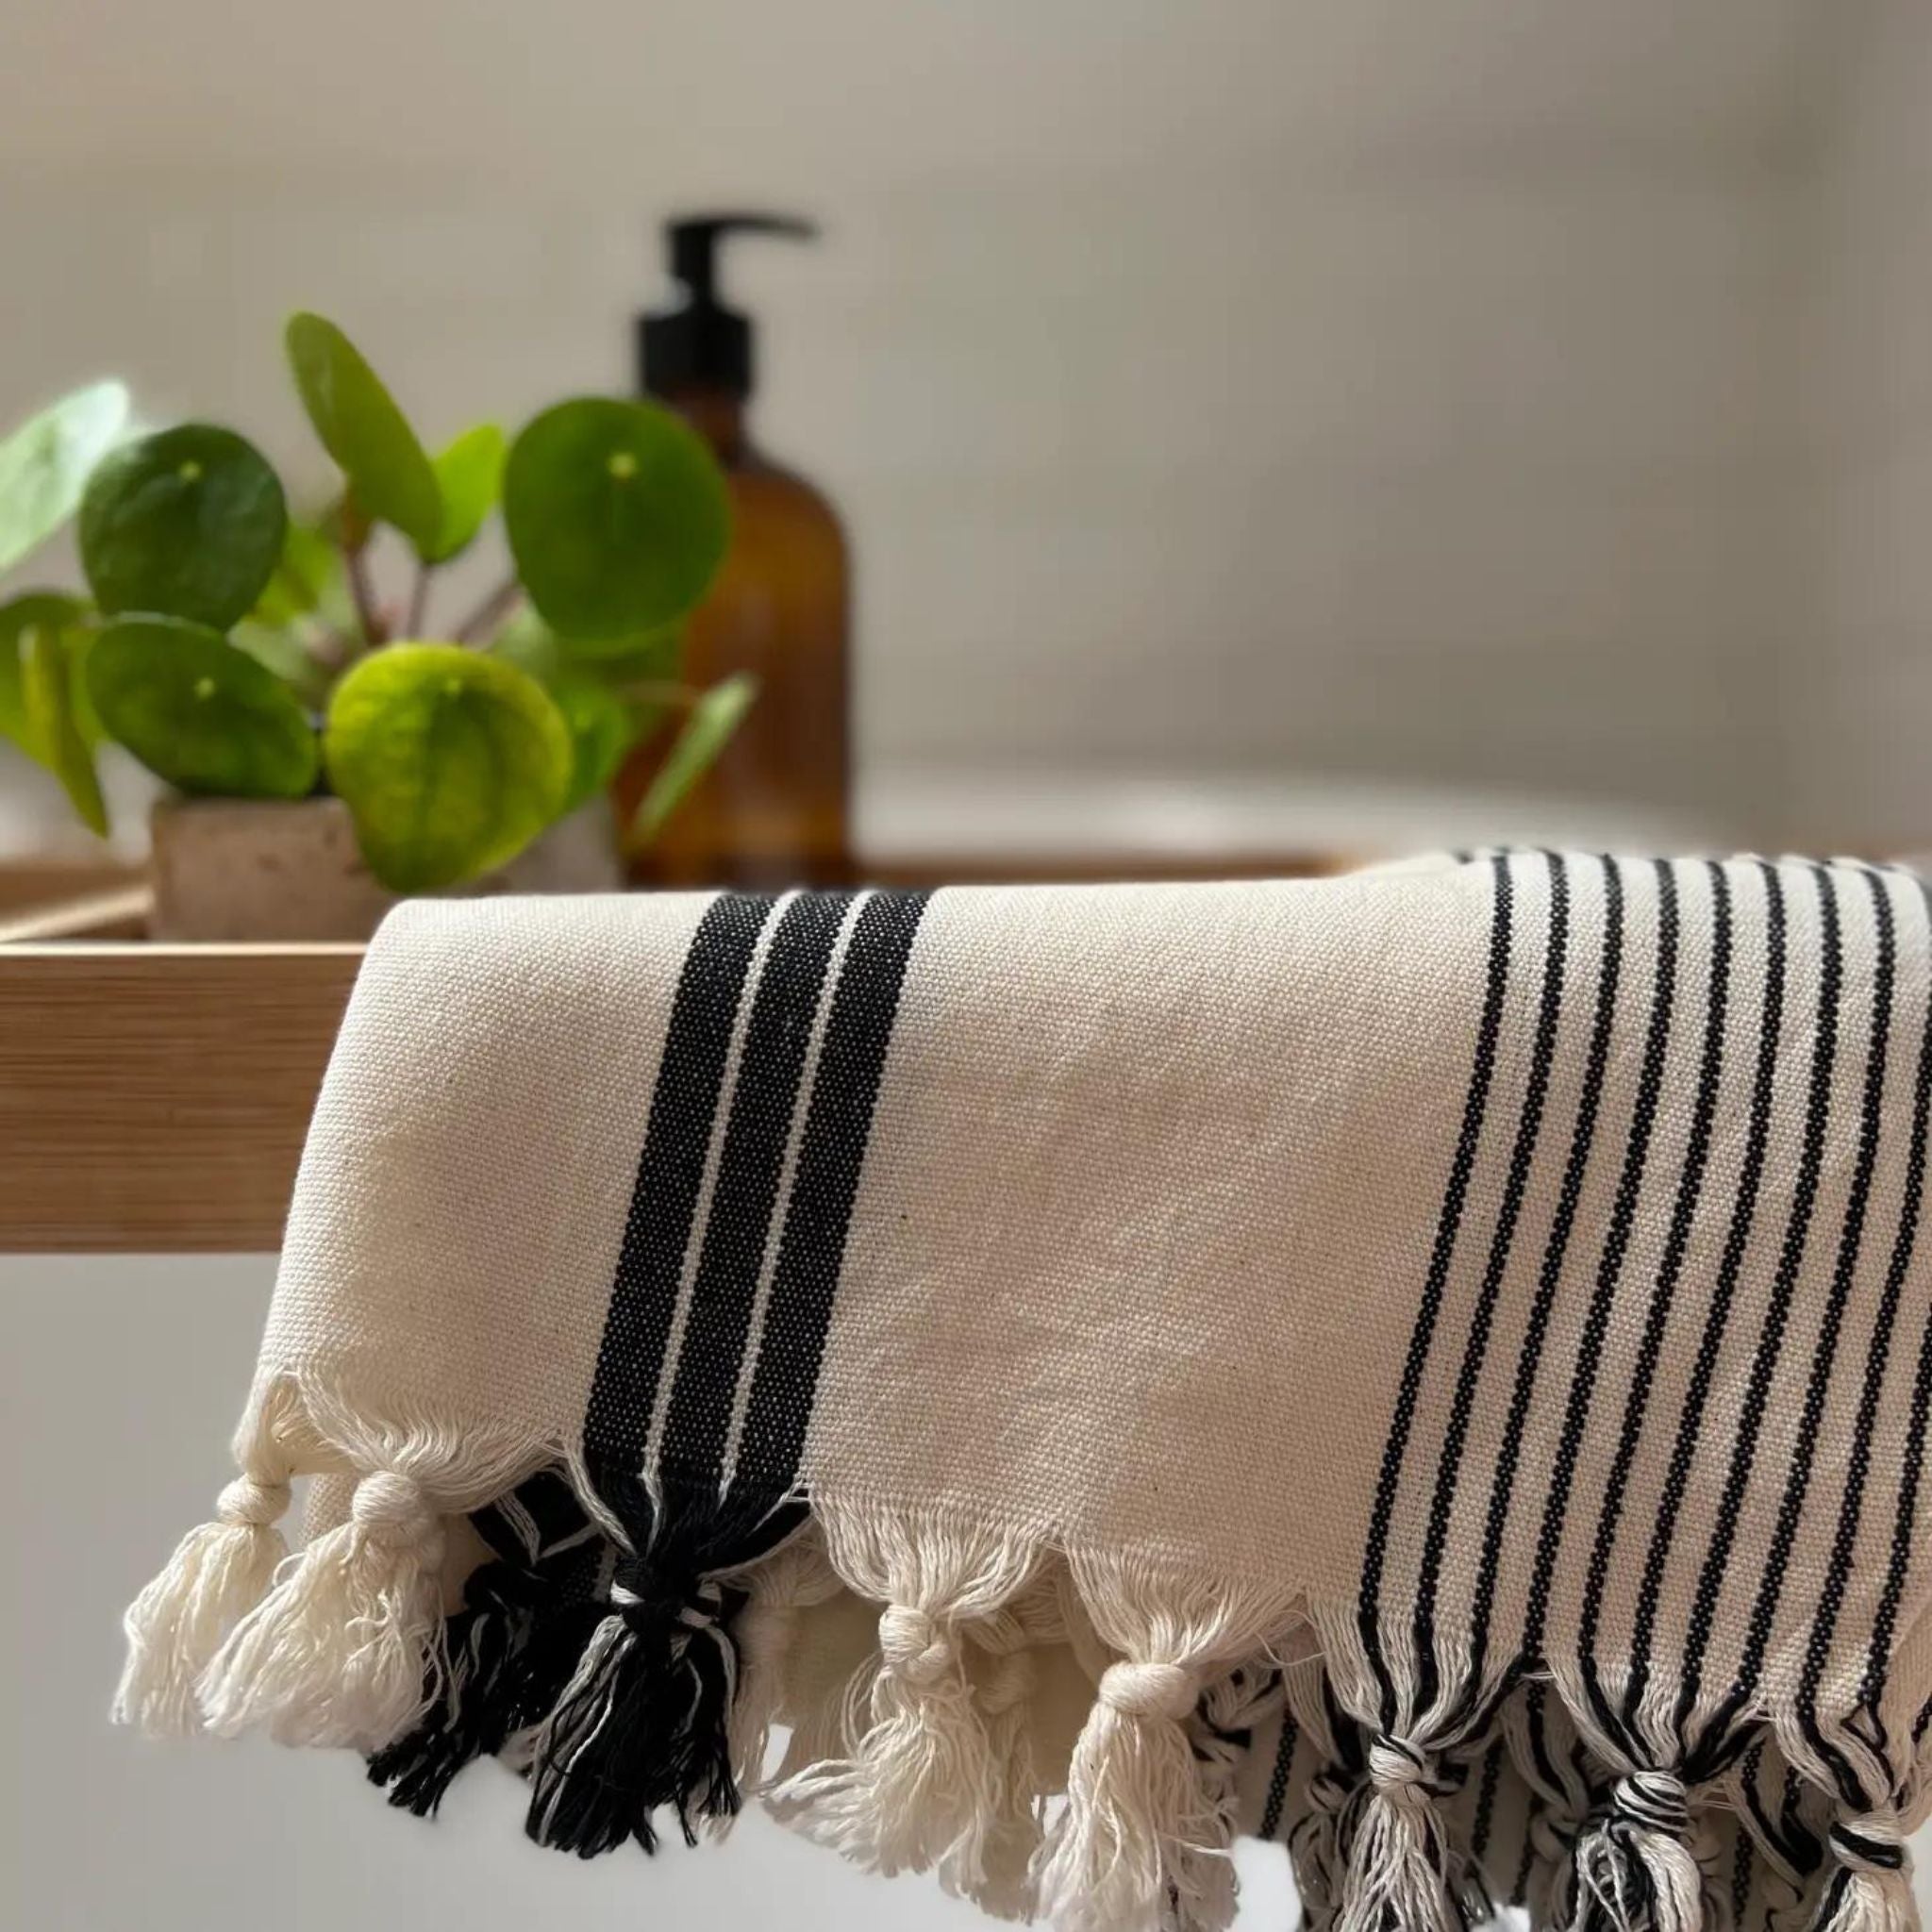 This lovely flat weave cotton towel is a super all-rounder in the home. Generously loomed with simple utility navy stripe details and a hand-finished fringe, the silas can be used as a hand, hair and tea towel, bath mat or even as a place setting at the table. Its packaging denotes multi-functional uses - perfect for those who like to do more with less.. 